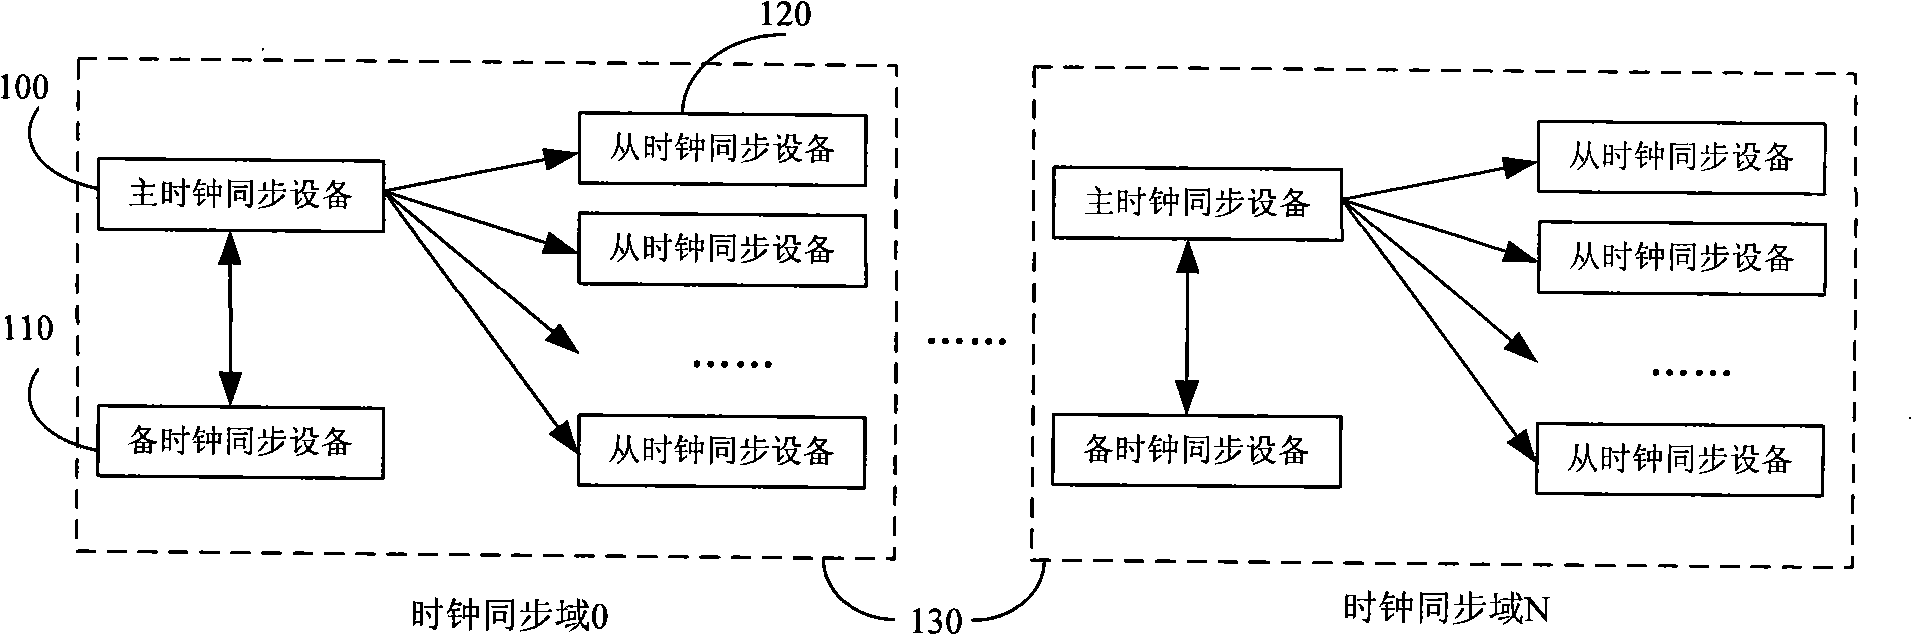 Time synchronization method and system for multi-core system